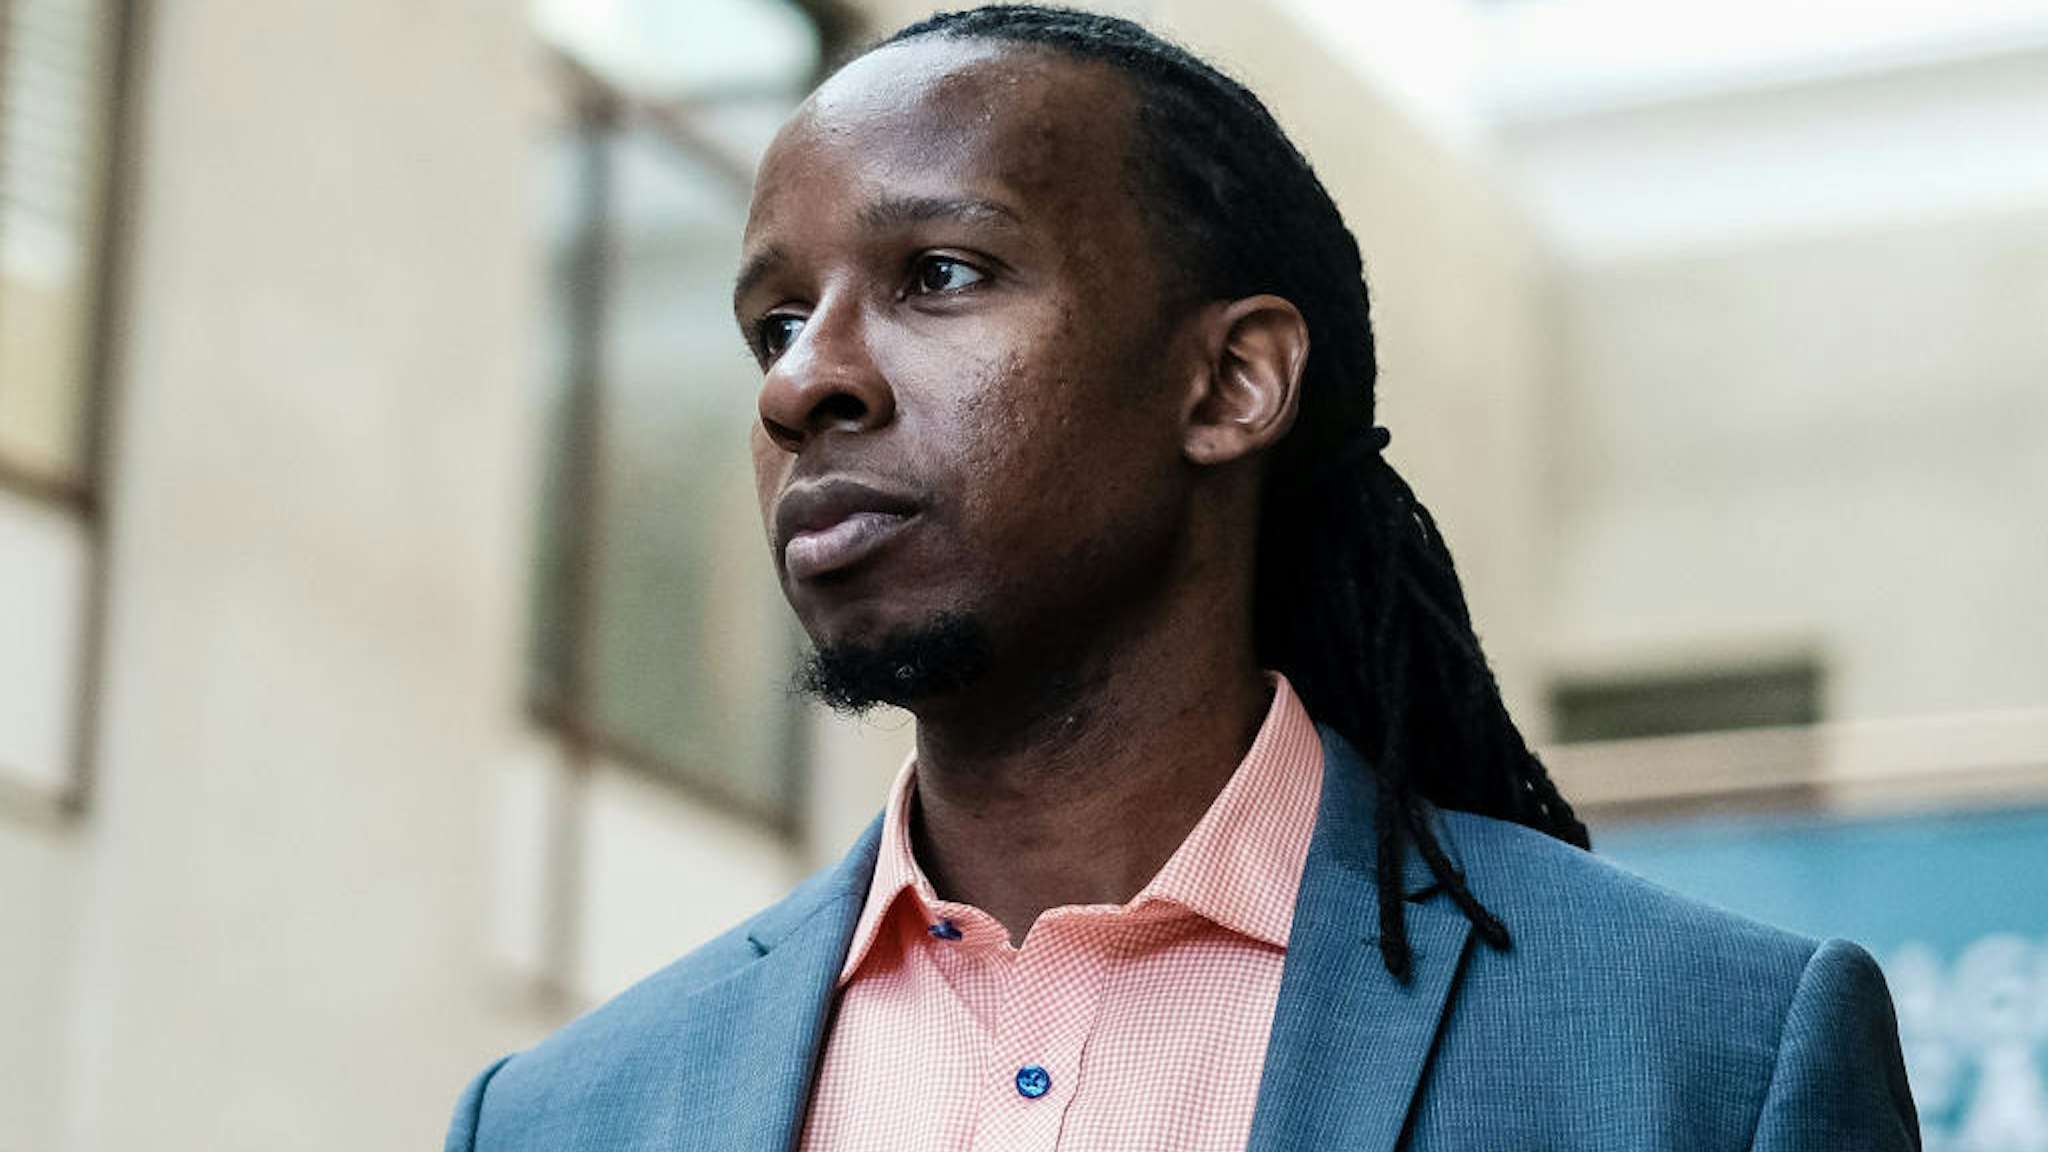 WASHINGTON, US - SEPTEMBER 26: American University professor Dr. Ibram X. Kendi​, stands for a portrait at the School of International Service following a panel discussion on his new book “ How to Be an Antiracist” in Washington, DC. Kendi’s discussion spoke on strategies to identify and overcome racism on September 26, 2019 in Washington, DC. (Michael A. McCoy/For The Washington Post)